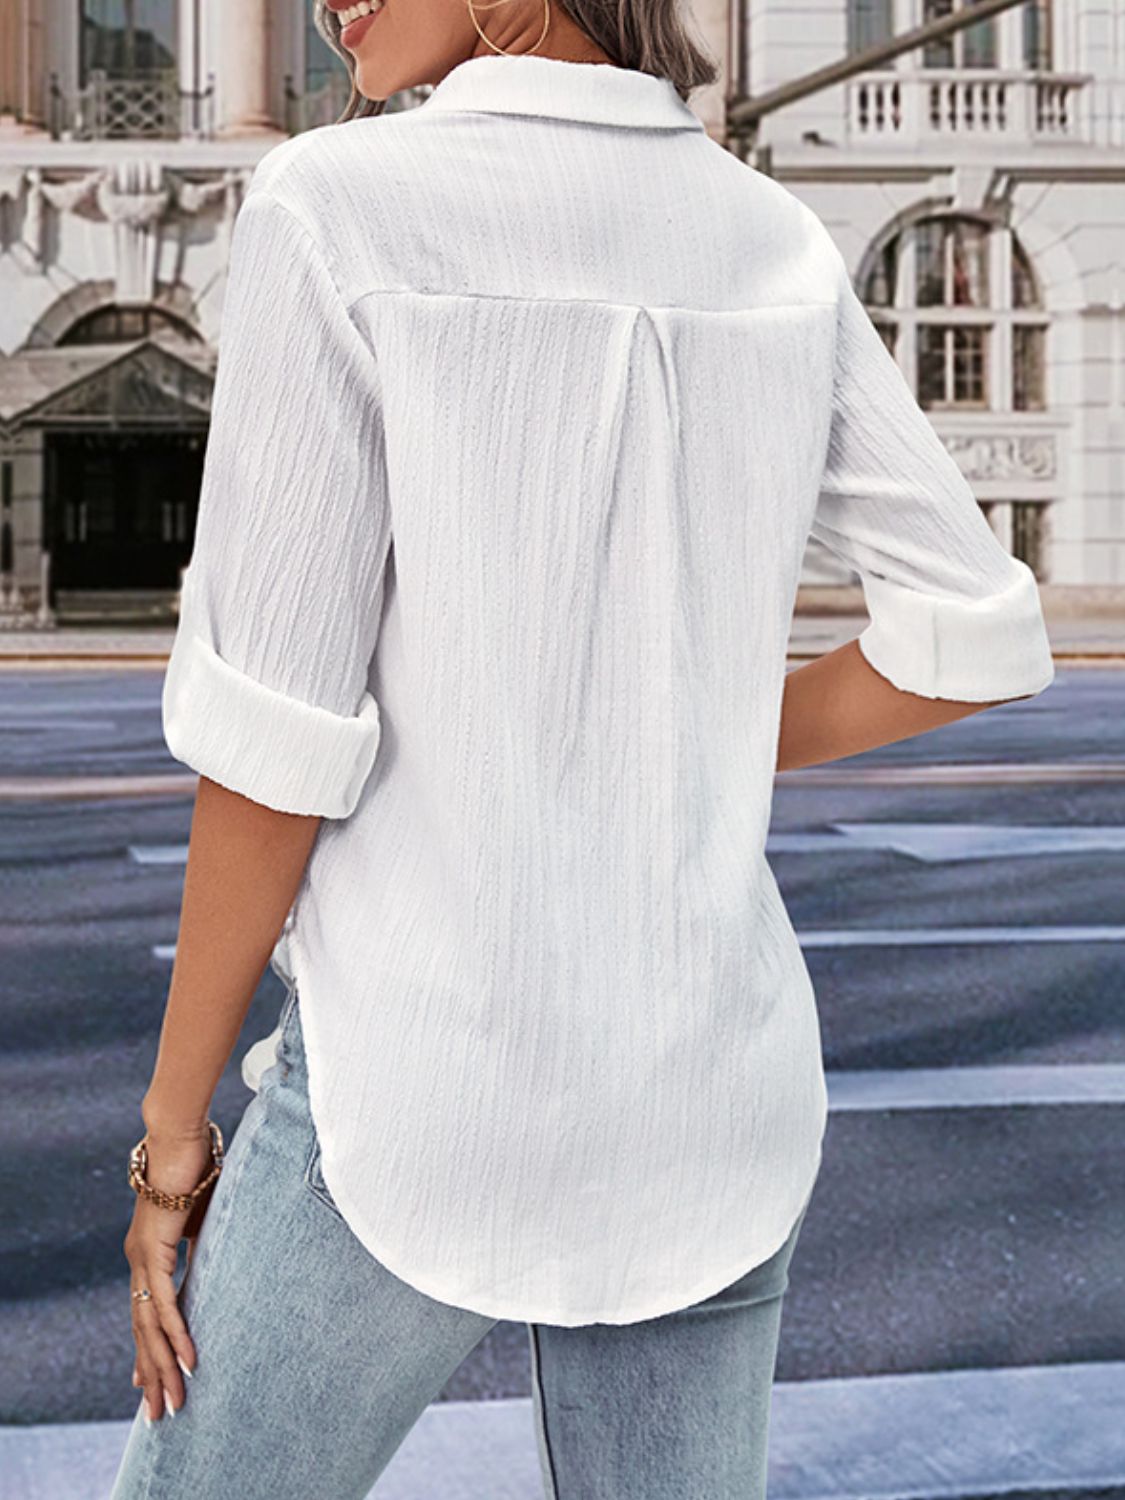 Collared Neck Twisted Shirt